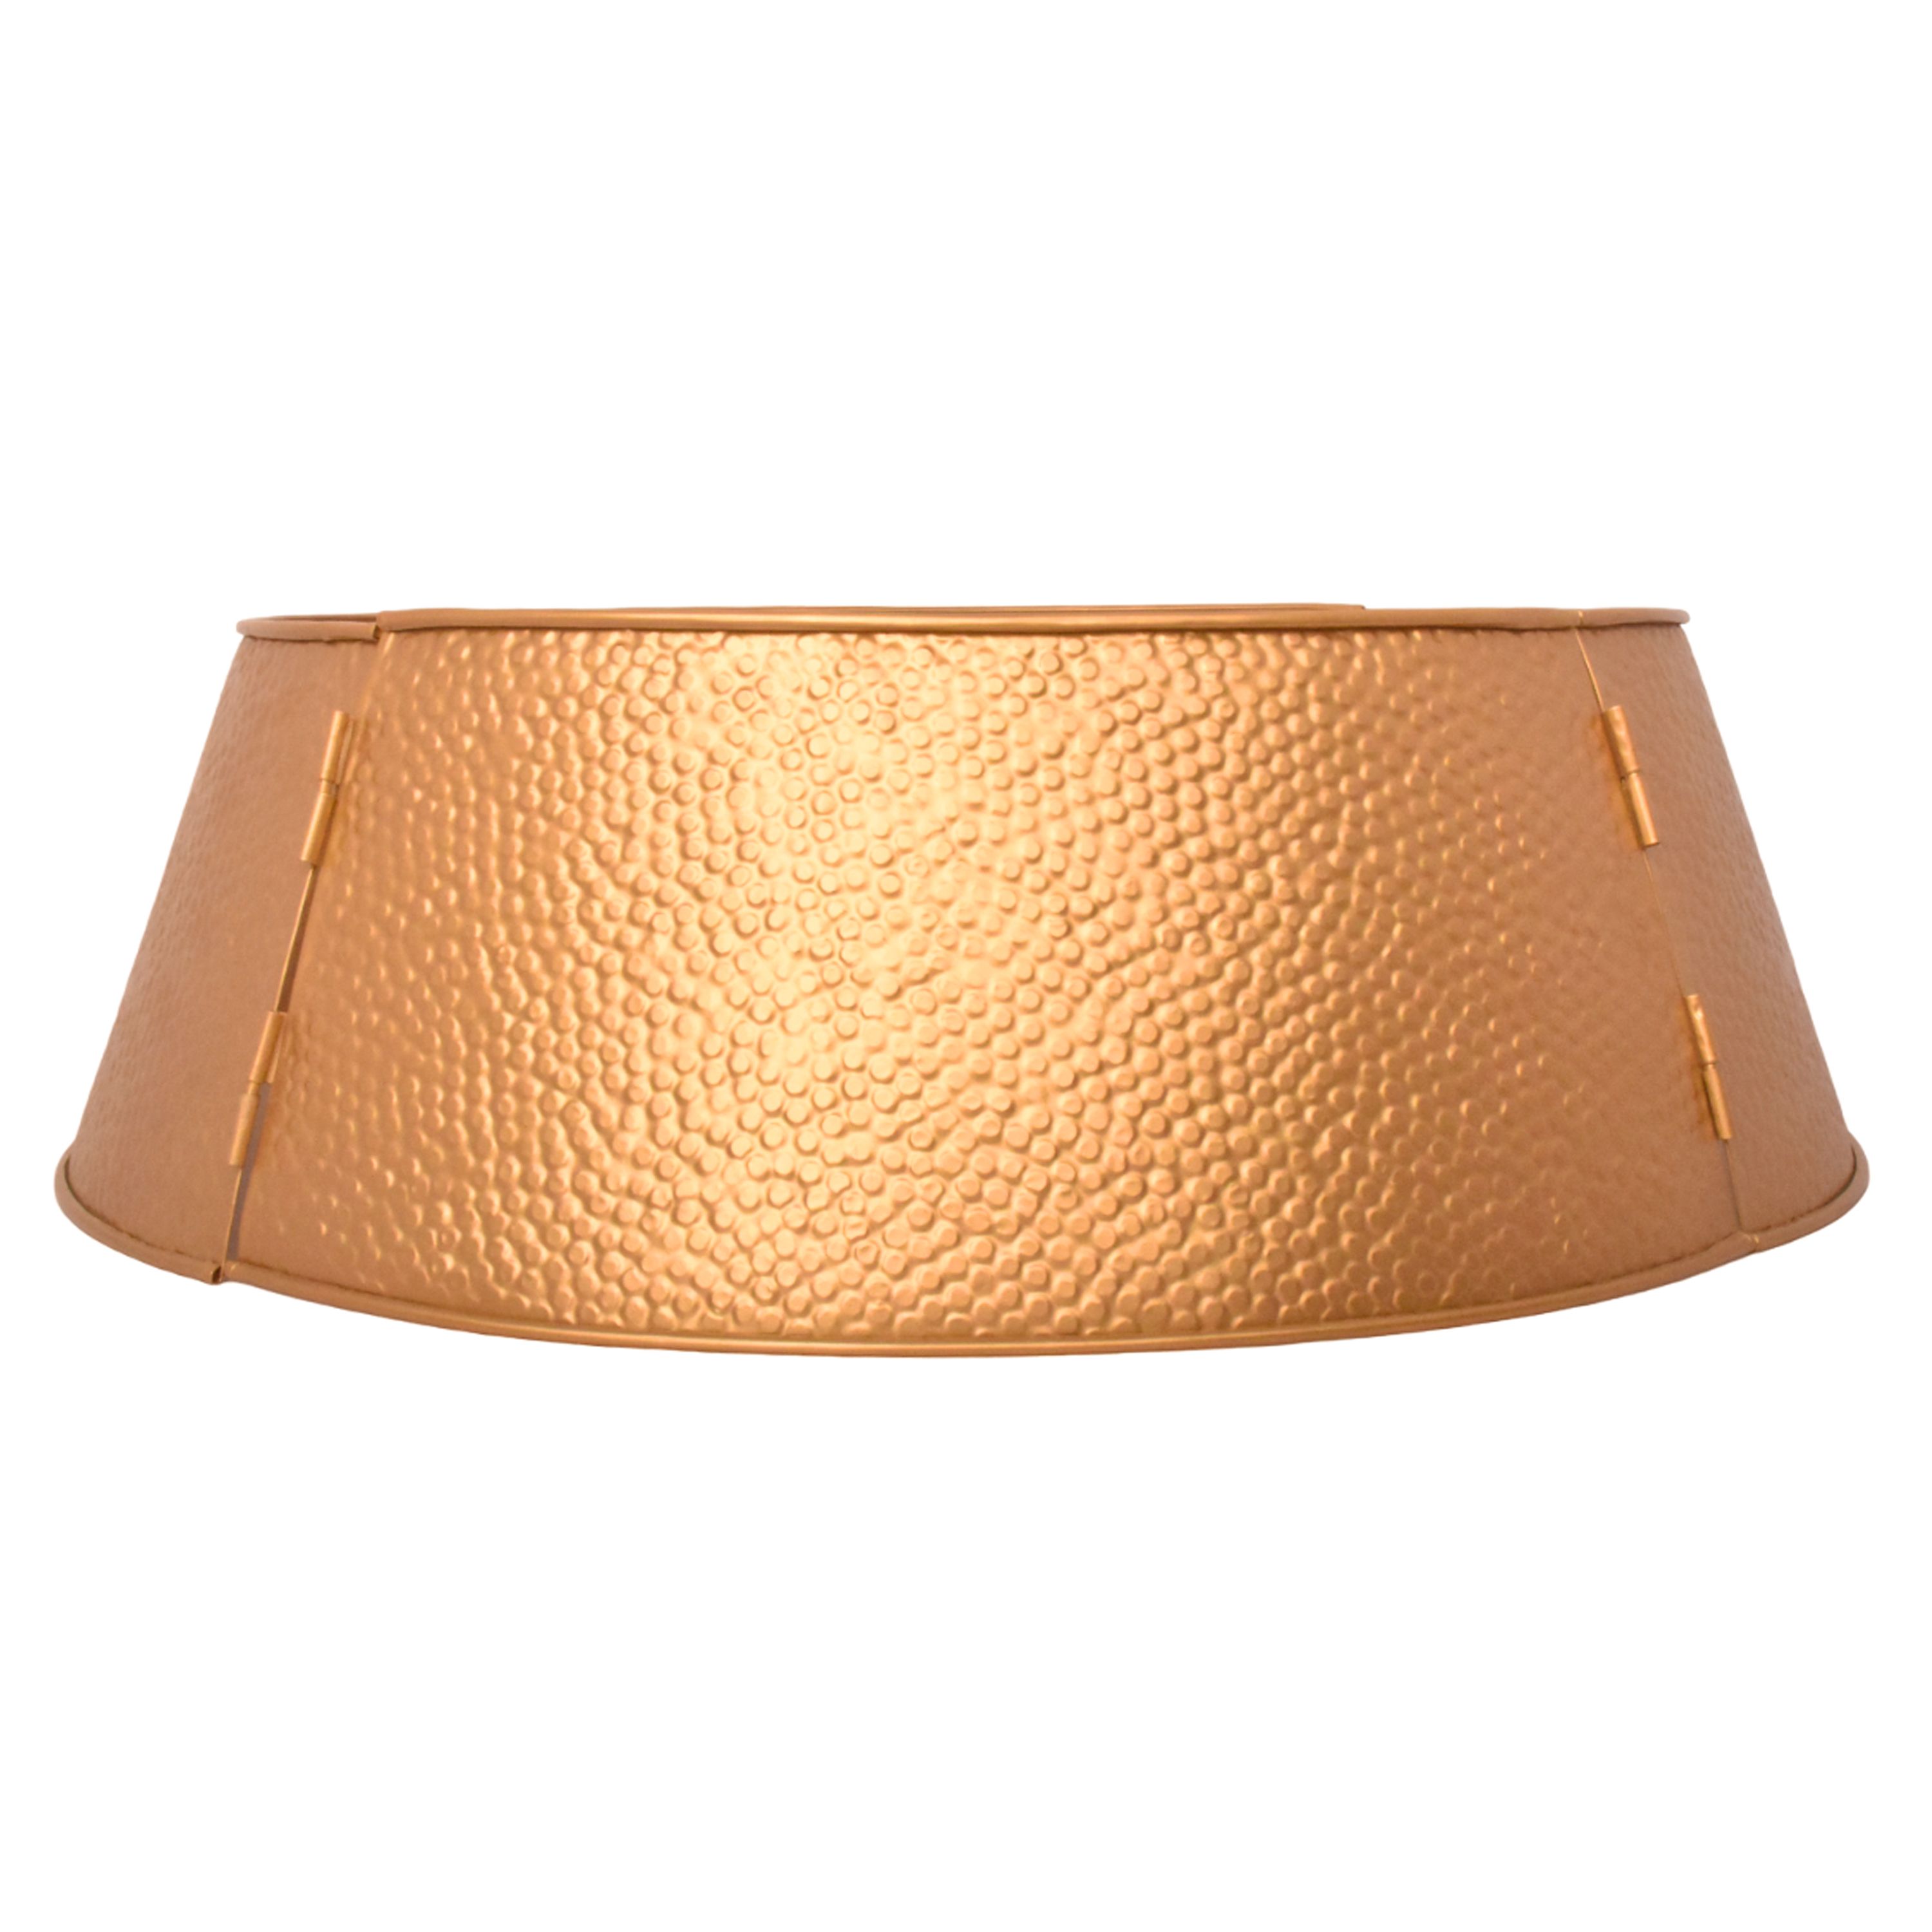 Gold Metal Honeycomb Hammered Tree Collar, 27 in x 27 in x 8 in, by Holiday Time | Walmart (US)